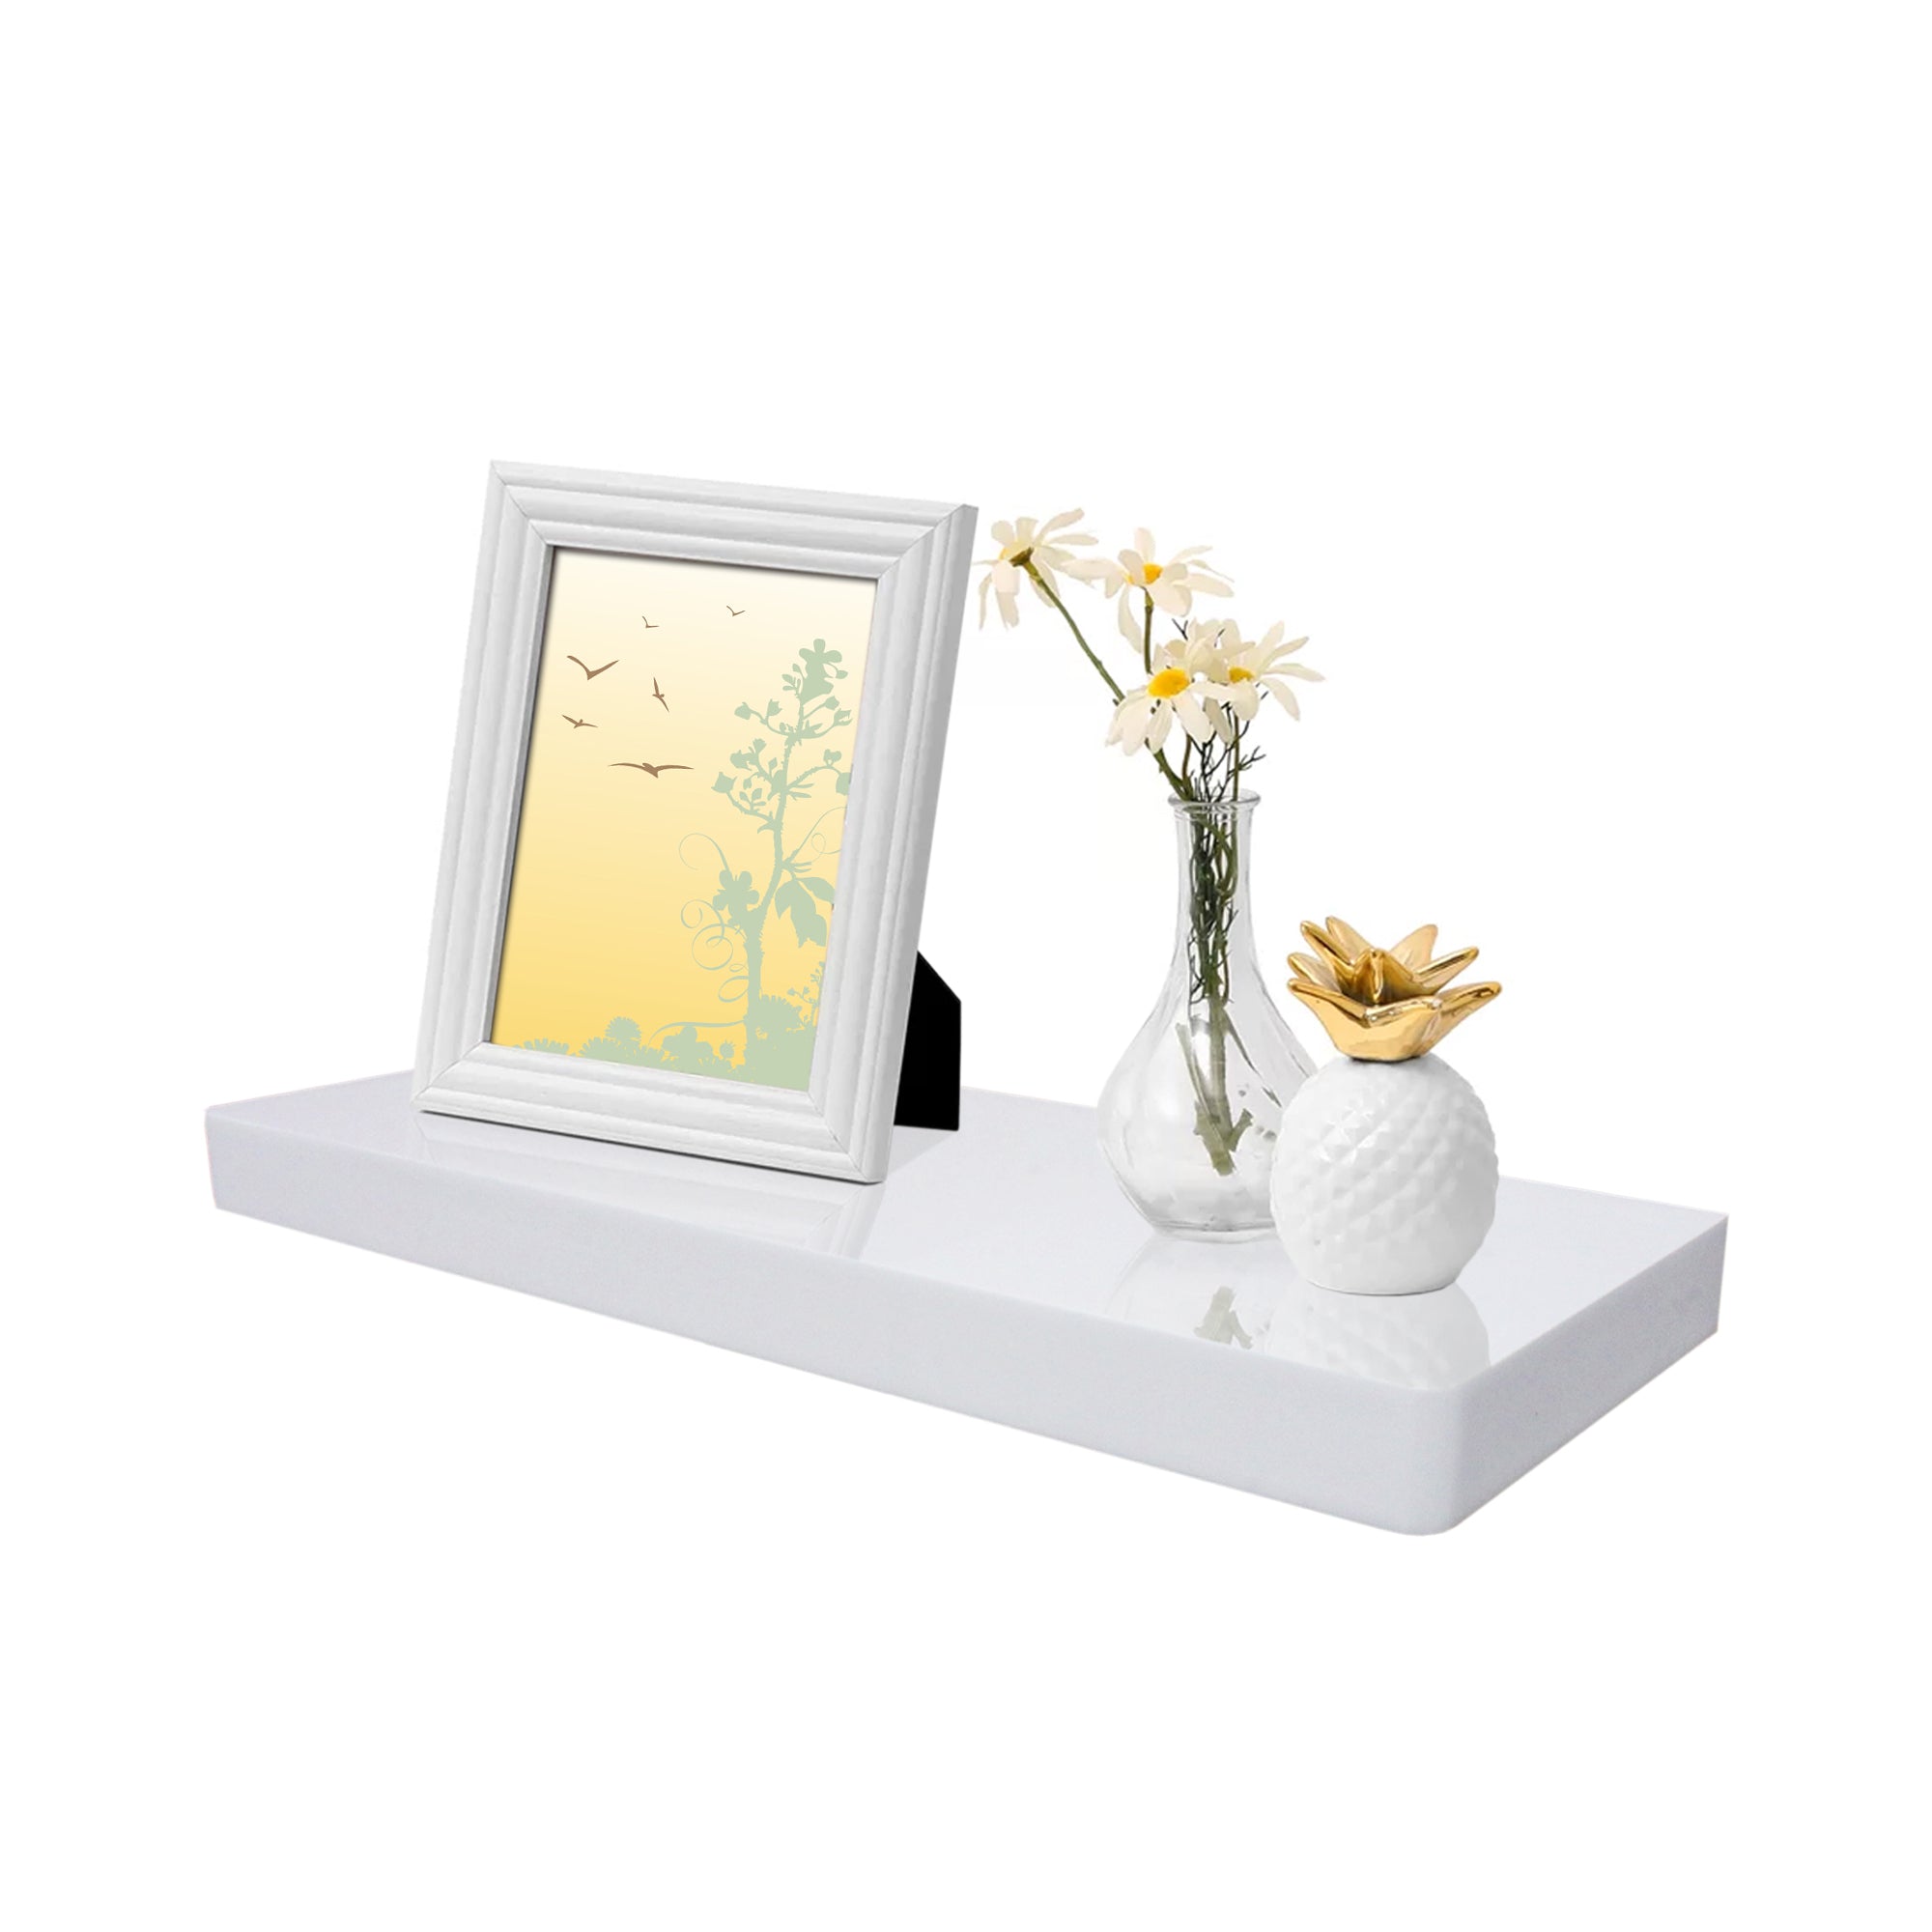 50cm long high gloss float shelf. It sticks out 20cm from the wall and has rounded corners. The shelf has a thickness of 3.8cm, colour white.